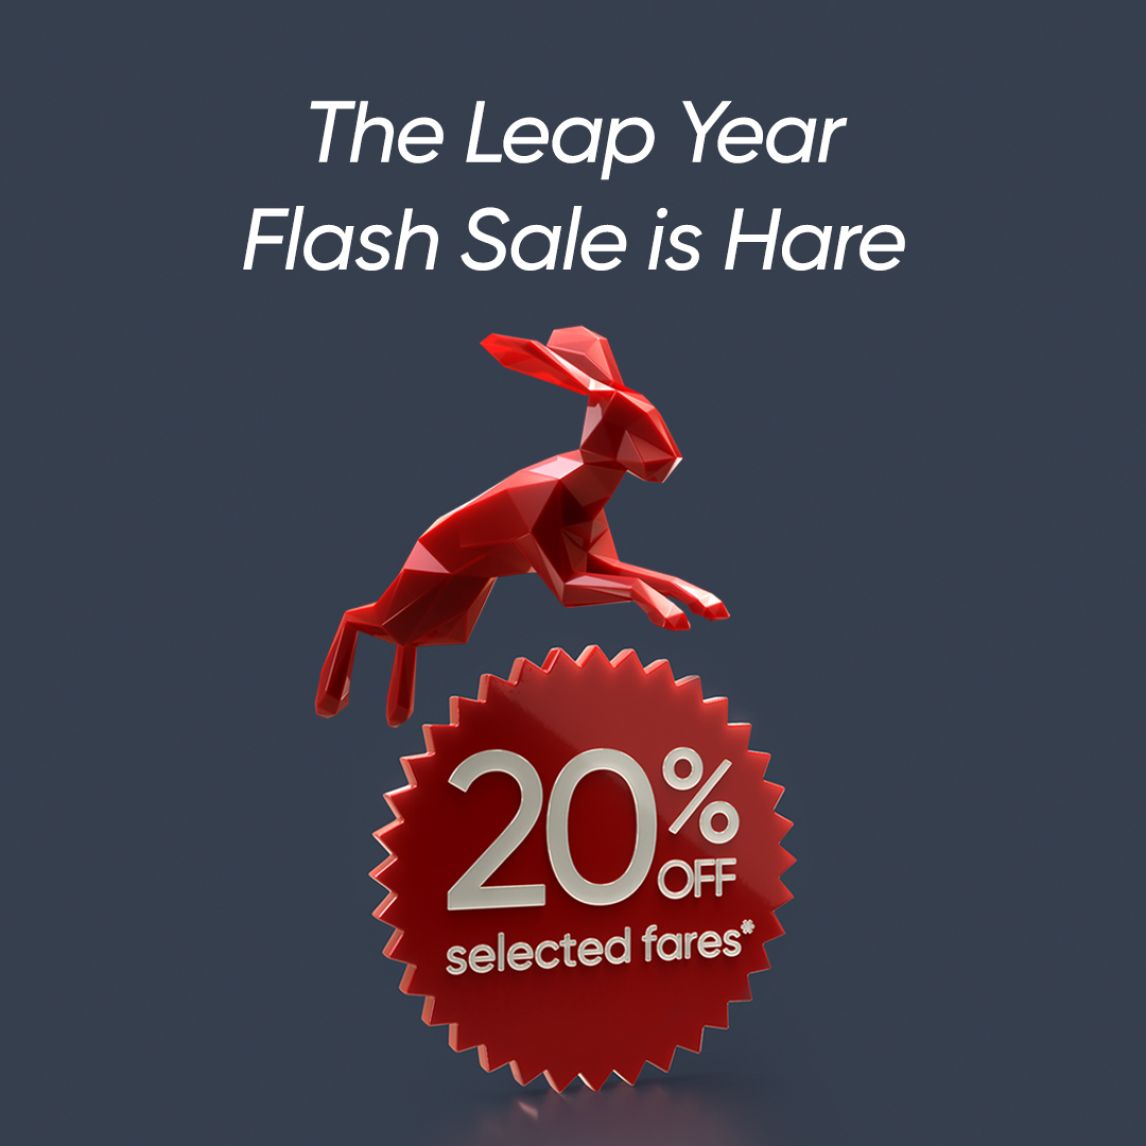 Hare leaping over 20% off selected fares sign